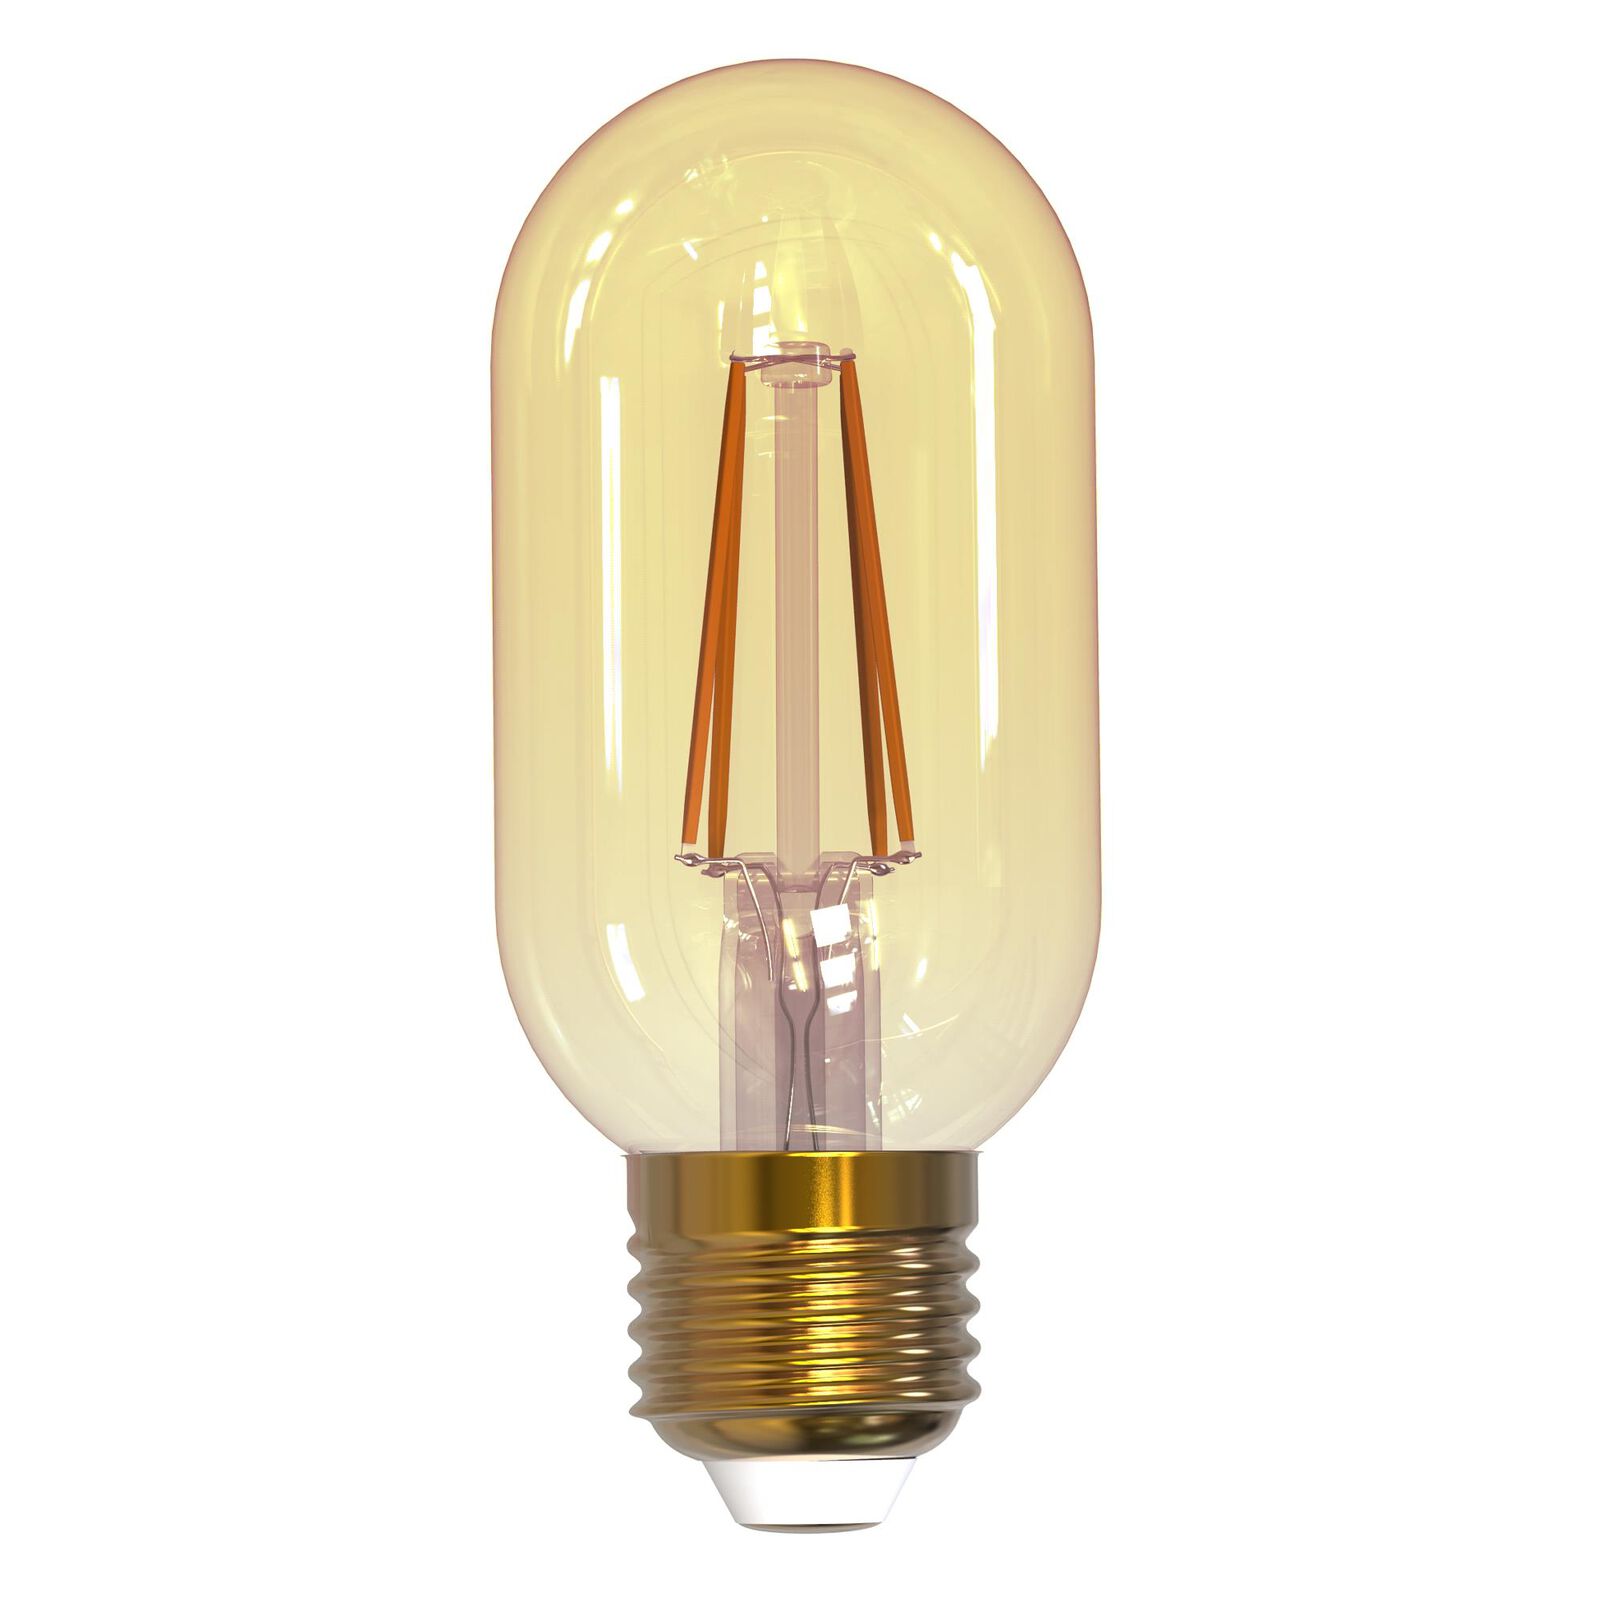 What Is A 4-Watt LED Bulb Equivalent To